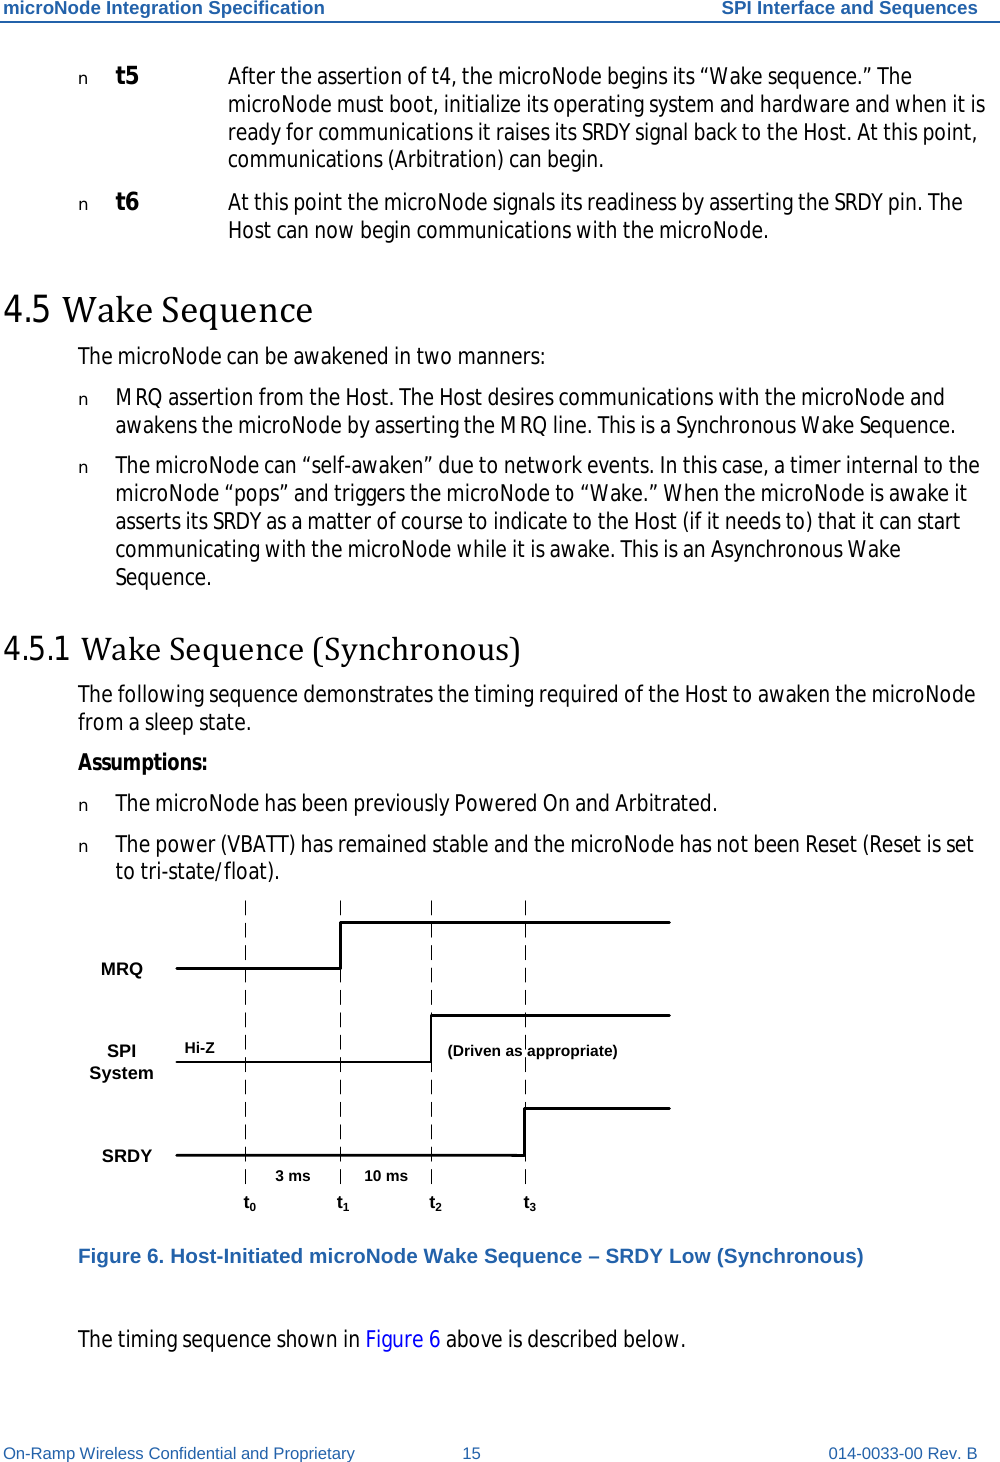 microNode Integration Specification SPI Interface and Sequences On-Ramp Wireless Confidential and Proprietary 15 014-0033-00 Rev. B n t5 After the assertion of t4, the microNode begins its “Wake sequence.” The microNode must boot, initialize its operating system and hardware and when it is ready for communications it raises its SRDY signal back to the Host. At this point, communications (Arbitration) can begin. n t6 At this point the microNode signals its readiness by asserting the SRDY pin. The Host can now begin communications with the microNode. 4.5 Wake Sequence  The microNode can be awakened in two manners:  n MRQ assertion from the Host. The Host desires communications with the microNode and awakens the microNode by asserting the MRQ line. This is a Synchronous Wake Sequence. n The microNode can “self-awaken” due to network events. In this case, a timer internal to the microNode “pops” and triggers the microNode to “Wake.” When the microNode is awake it asserts its SRDY as a matter of course to indicate to the Host (if it needs to) that it can start communicating with the microNode while it is awake. This is an Asynchronous Wake Sequence. 4.5.1 Wake Sequence (Synchronous) The following sequence demonstrates the timing required of the Host to awaken the microNode from a sleep state. Assumptions: n The microNode has been previously Powered On and Arbitrated. n The power (VBATT) has remained stable and the microNode has not been Reset (Reset is set to tri-state/float). t0t1t2t3SRDYSPI SystemMRQHi-Z10 ms(Driven as appropriate)3 ms Figure 6. Host-Initiated microNode Wake Sequence – SRDY Low (Synchronous)  The timing sequence shown in Figure 6 above is described below. 